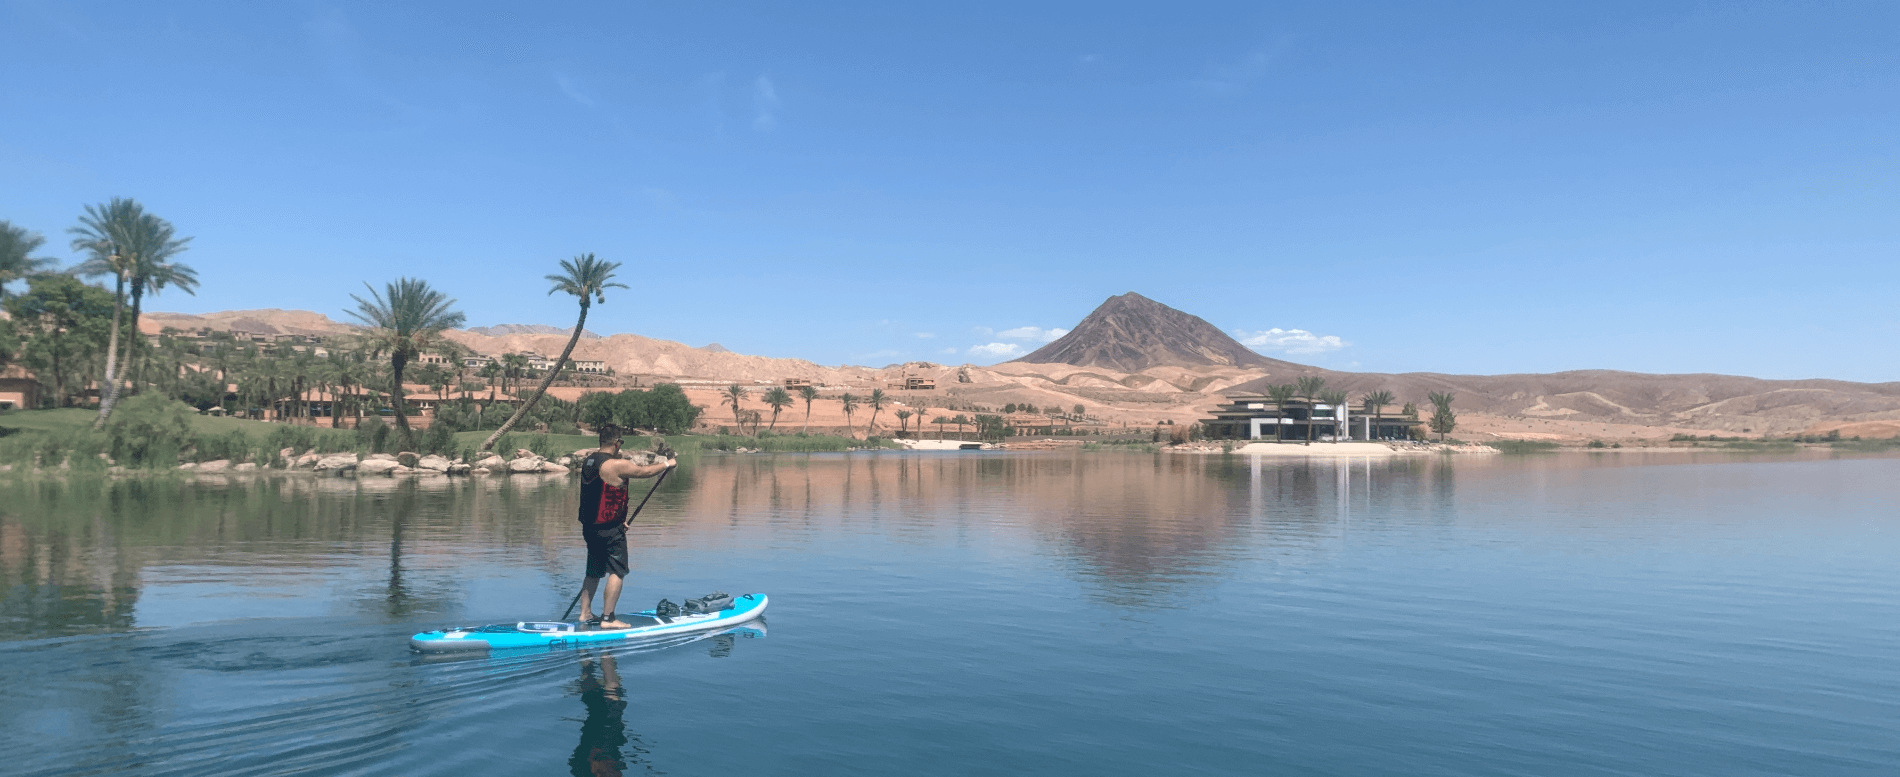 The 10 Best Life Jackets (PFDs) for Paddle Boarding (SUP) in 2022